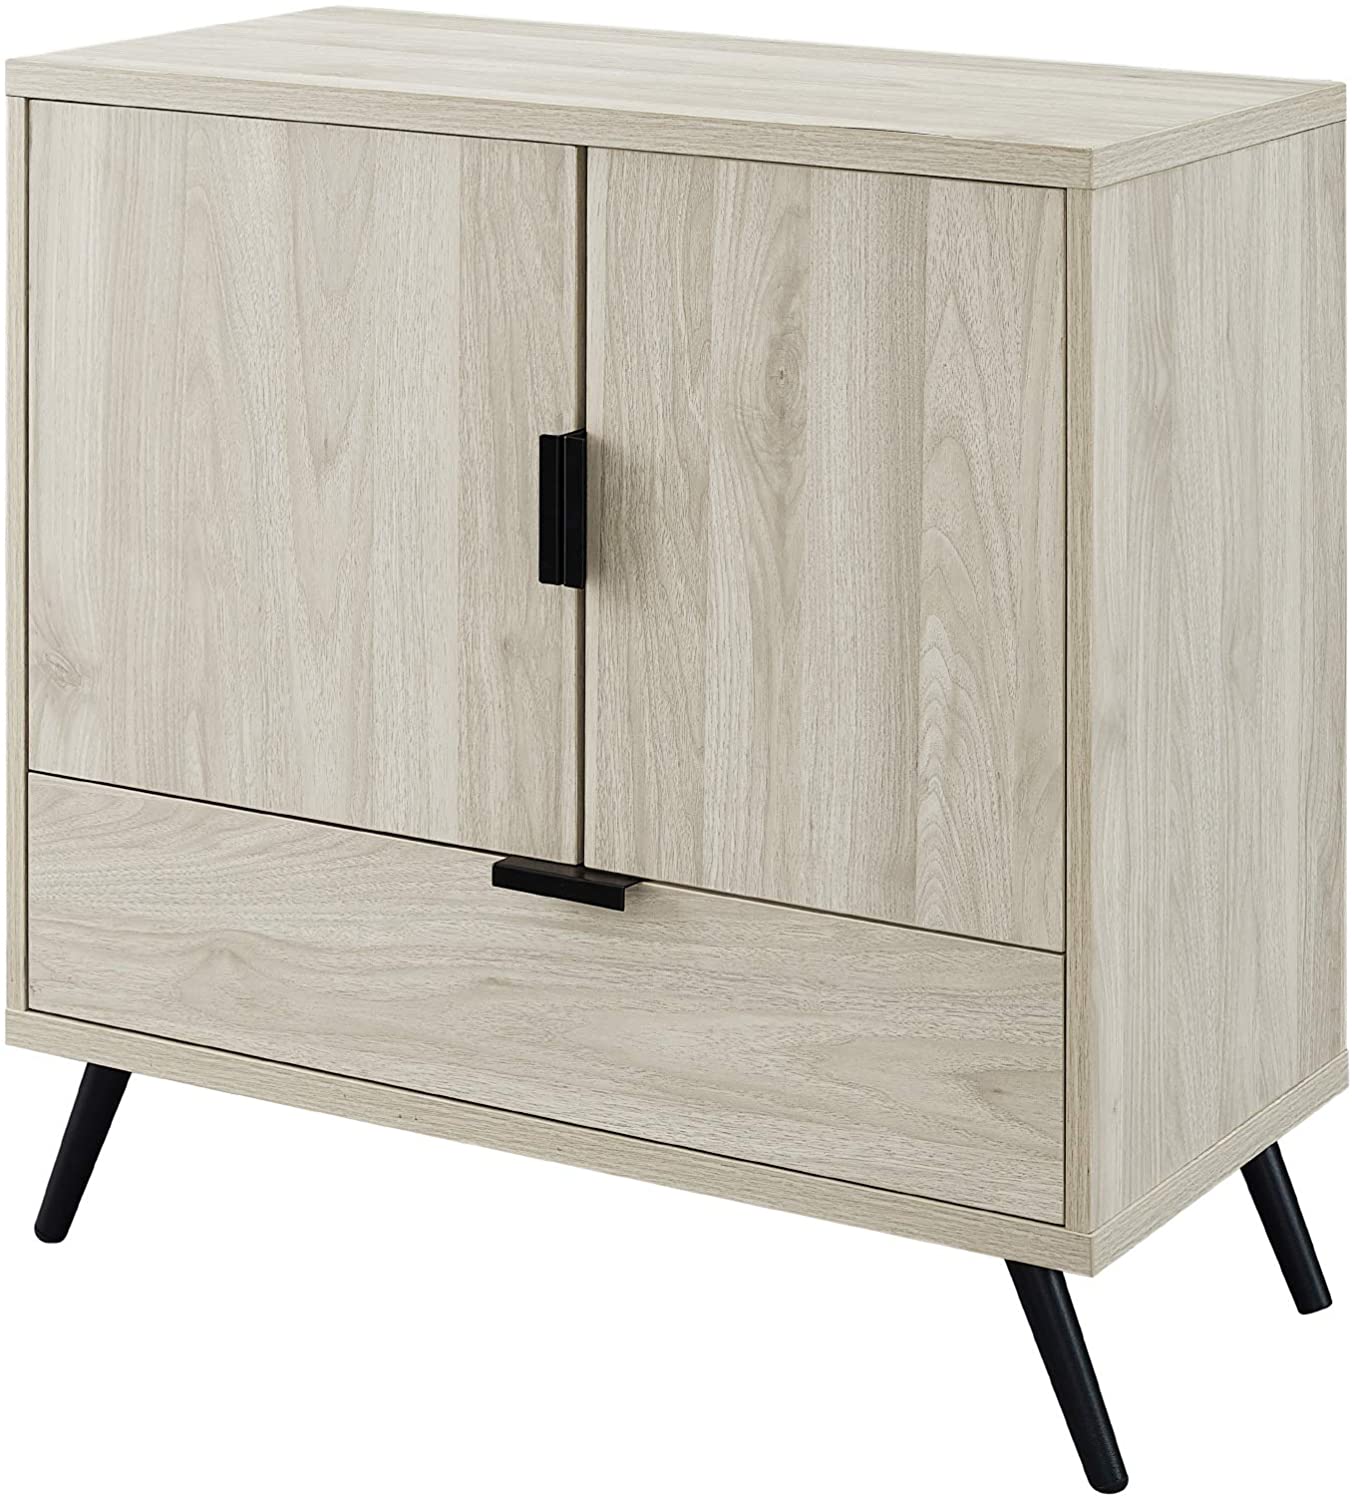 Strong Luxury Kitchen Furniture Sideboard Tables Modern Wooden Sideboard Cabinet France With 2 Sliding Doors And 1 Drawer